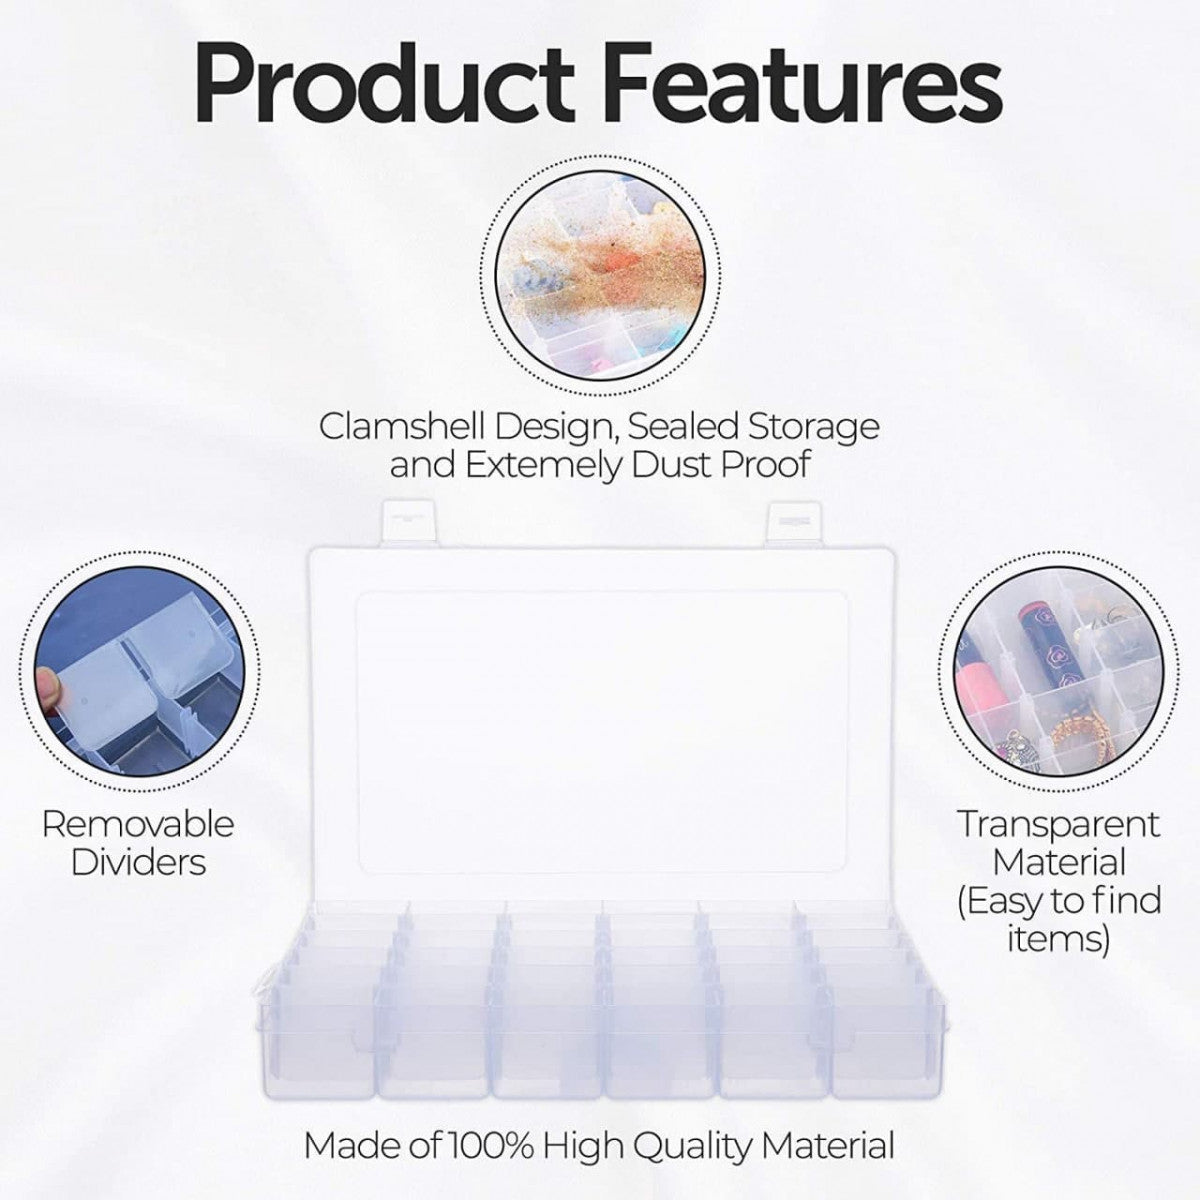 36 GRID COMPARTMENT PLASTIC STORAGE CONTAINERS